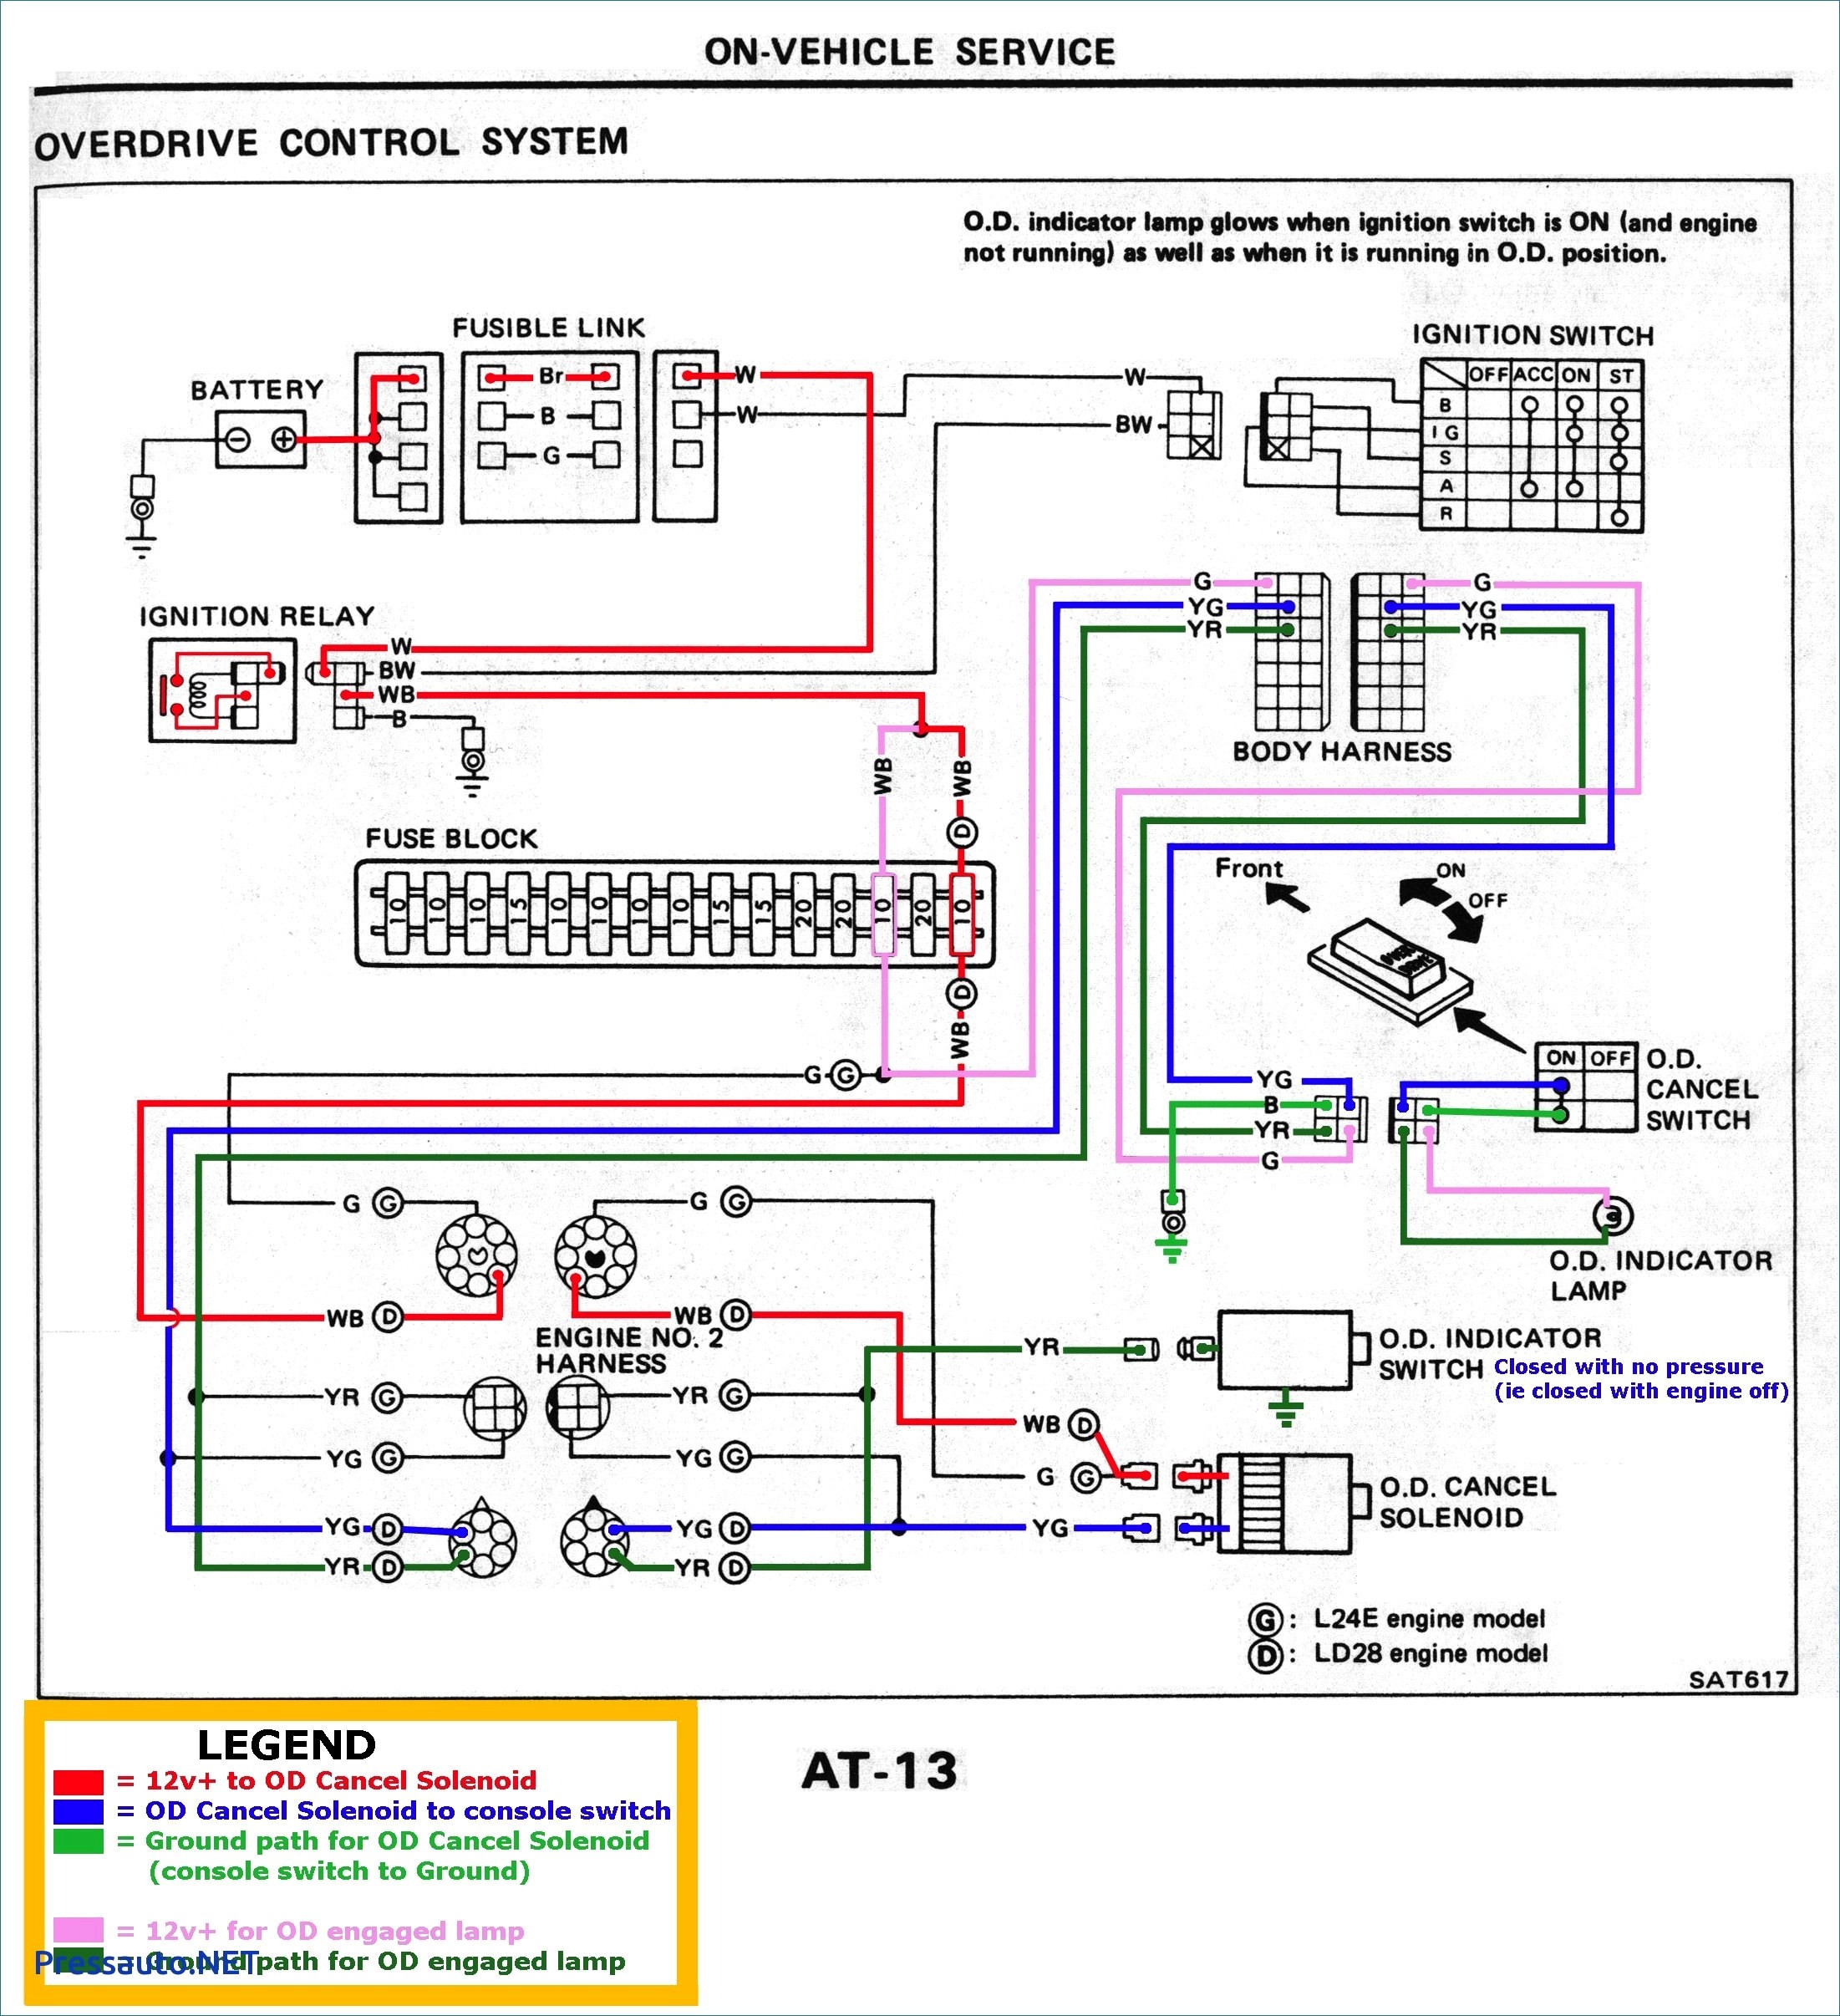 potentiometer wiring diagram electric scooter wiring diagram listelectric scooter wiring diagrams wiring diagram 48 volt electric